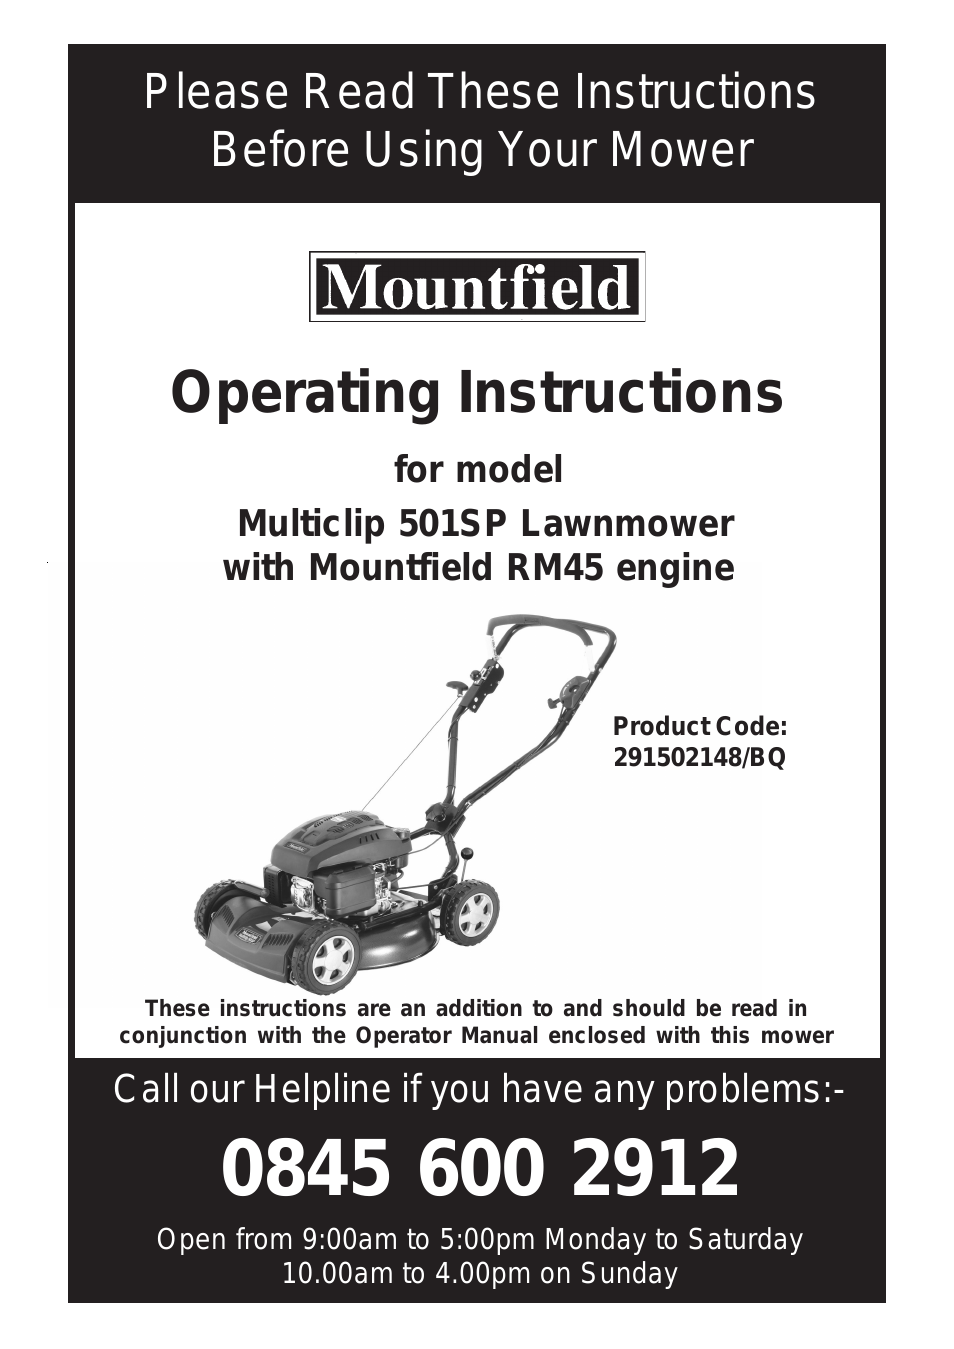 Multiclip 501SP Lawnmower with Mountfield RM45 engine 291502148/BQ